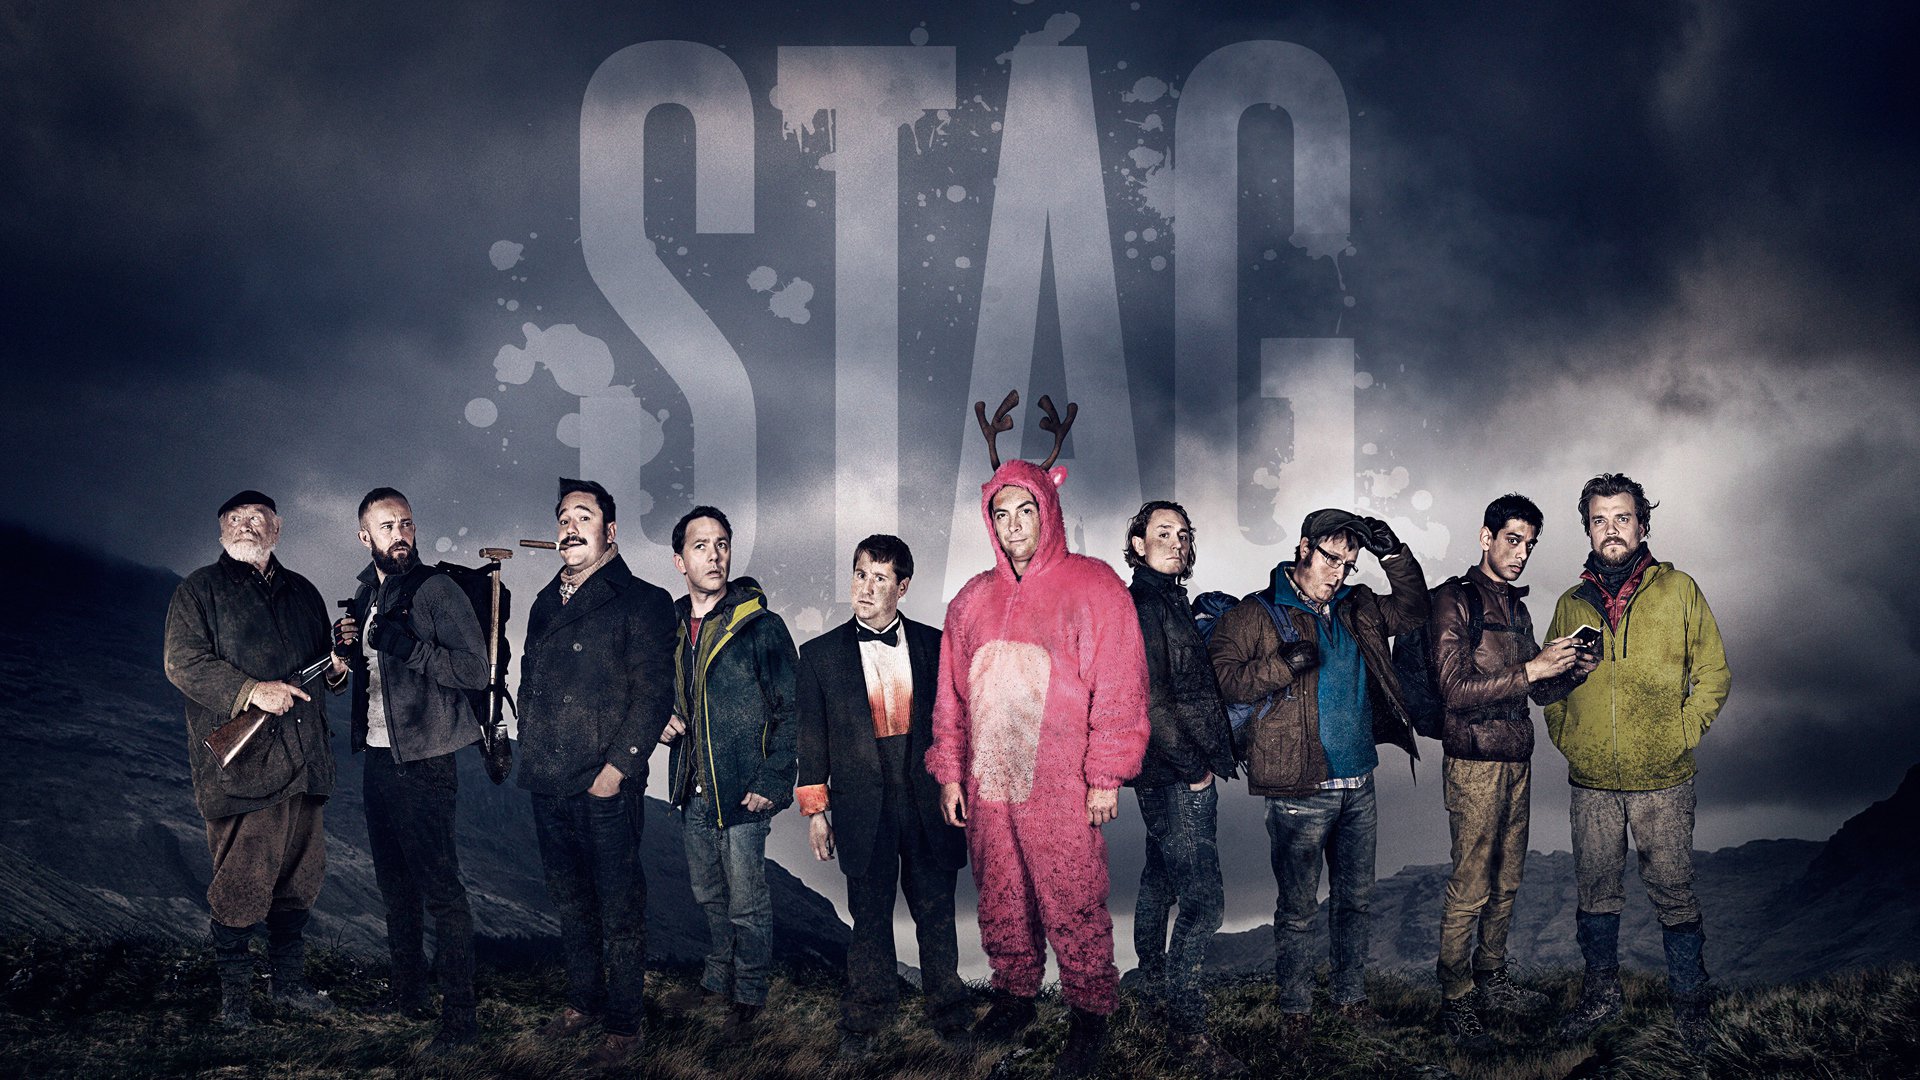 Free download wallpaper Tv Show, Stag on your PC desktop